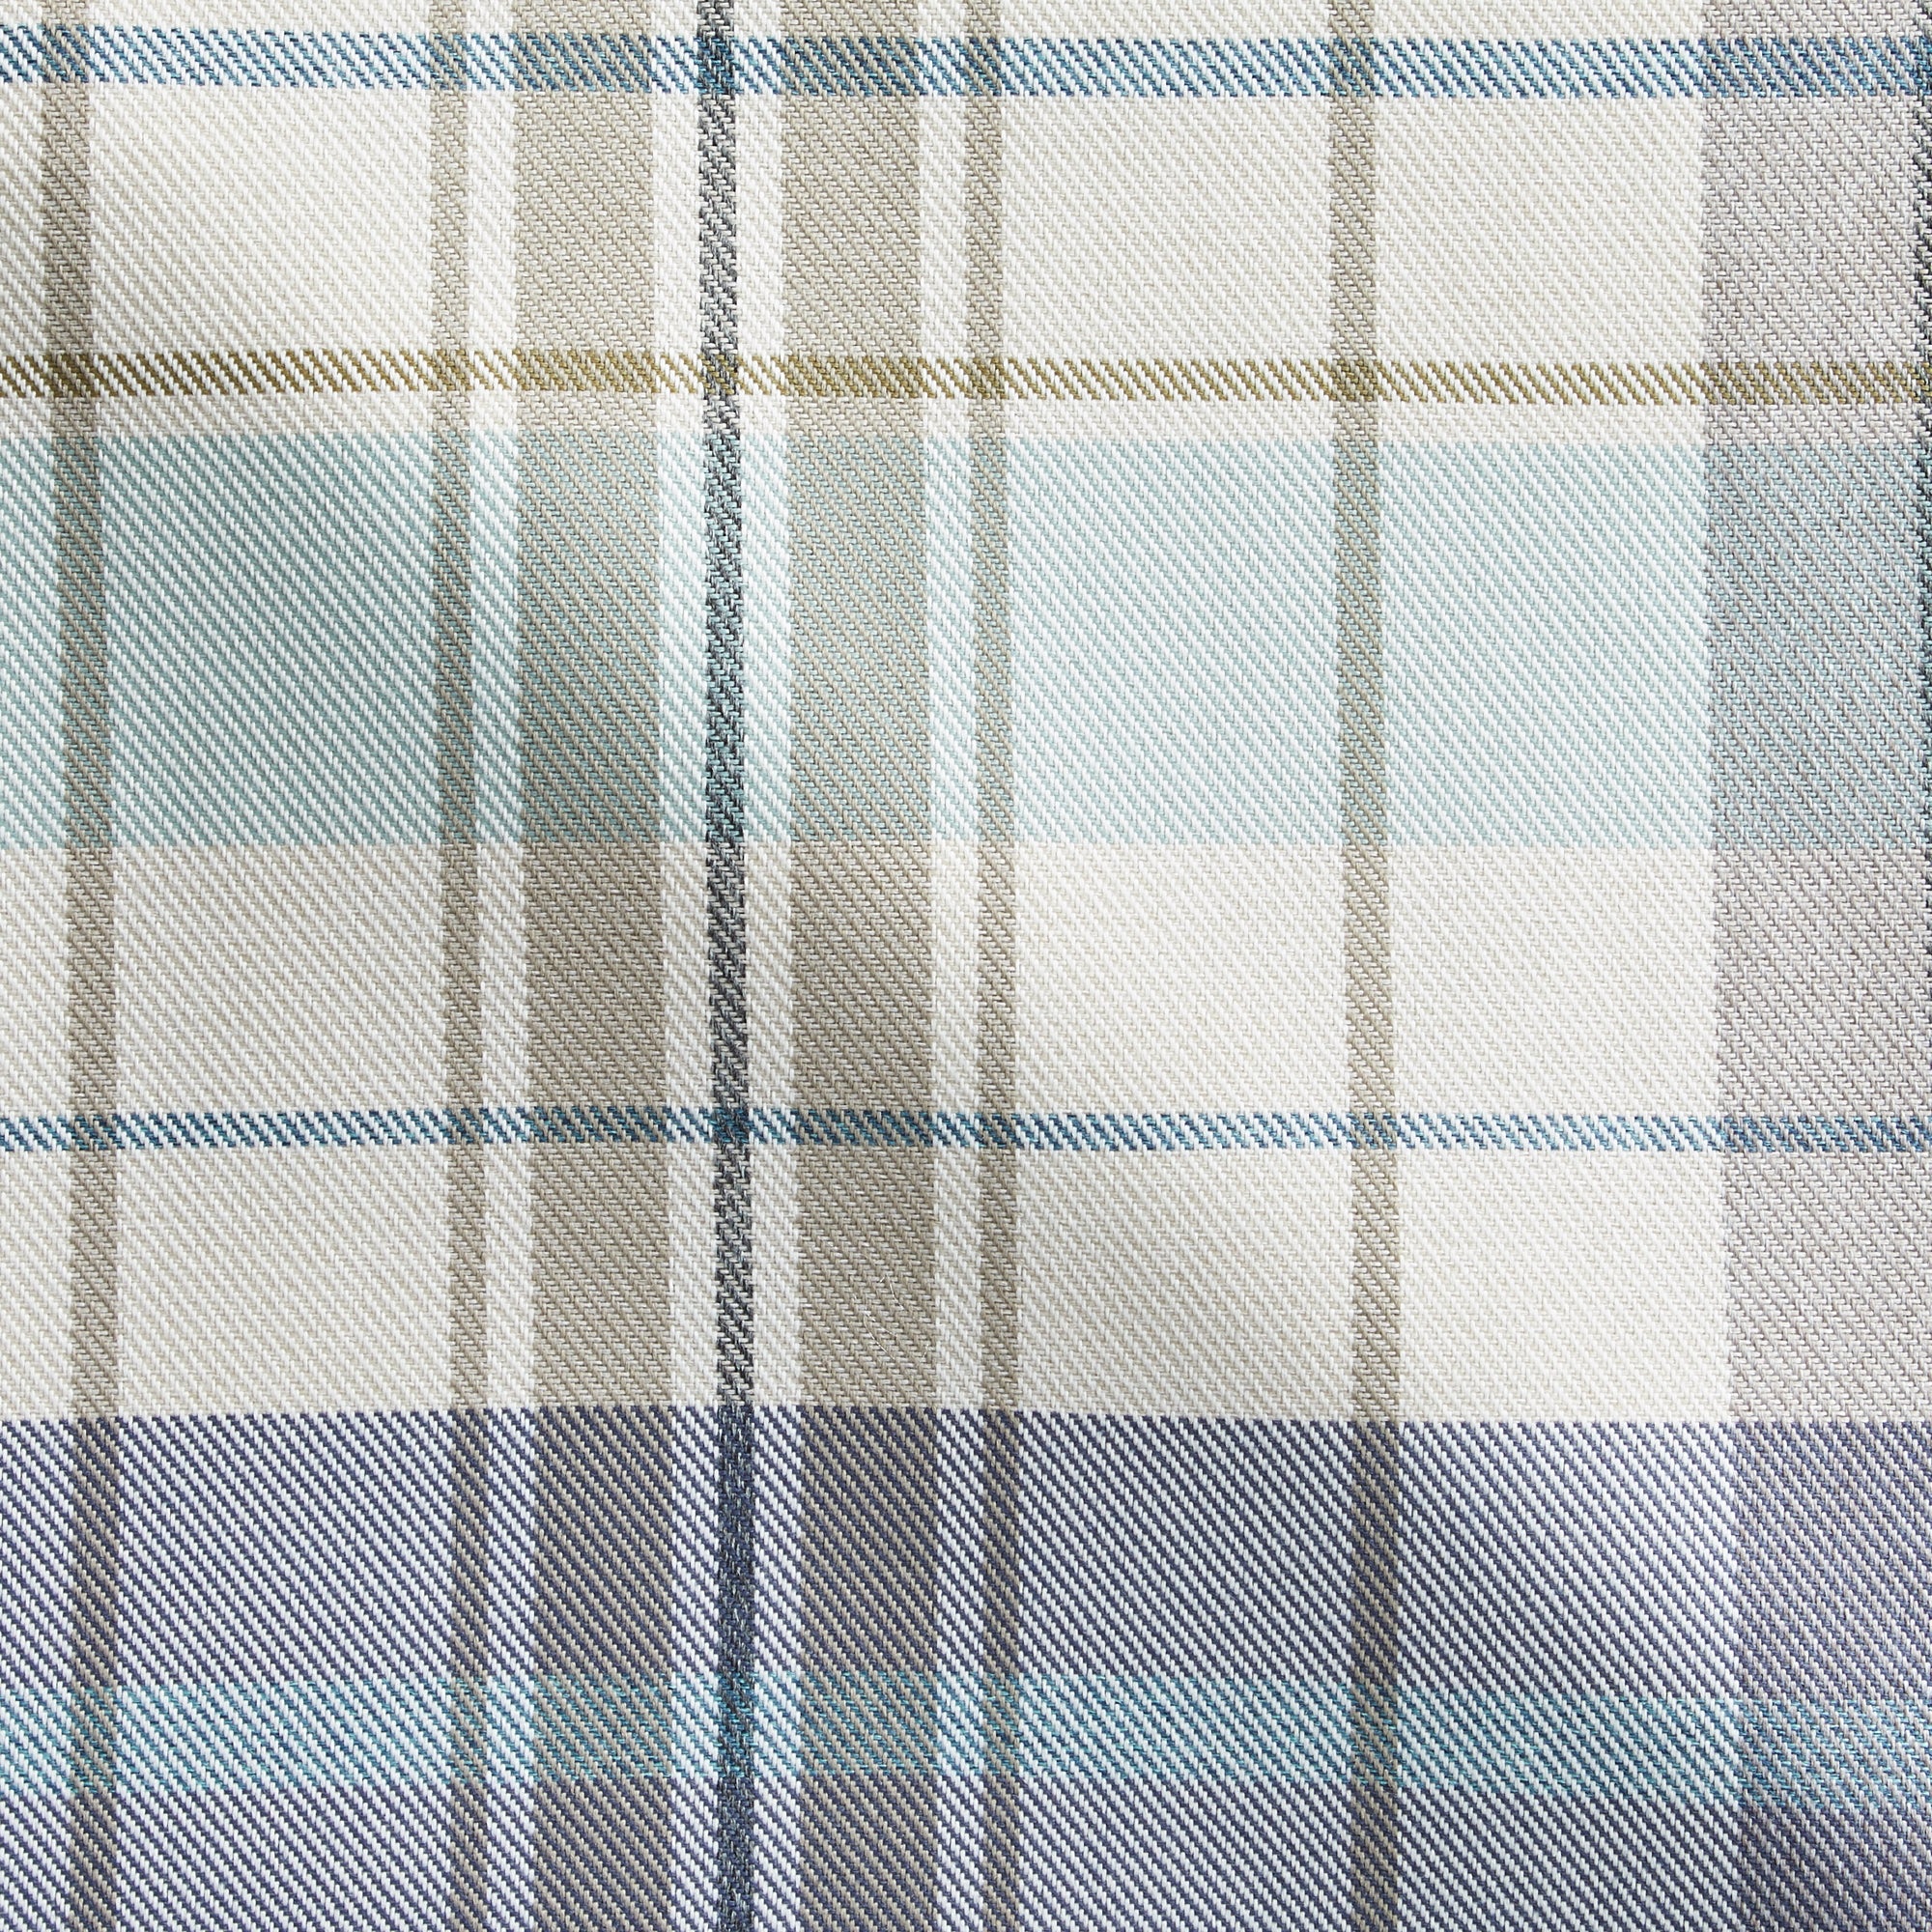 Nevis Check Made to Measure Curtains Nevis Check Seafoam